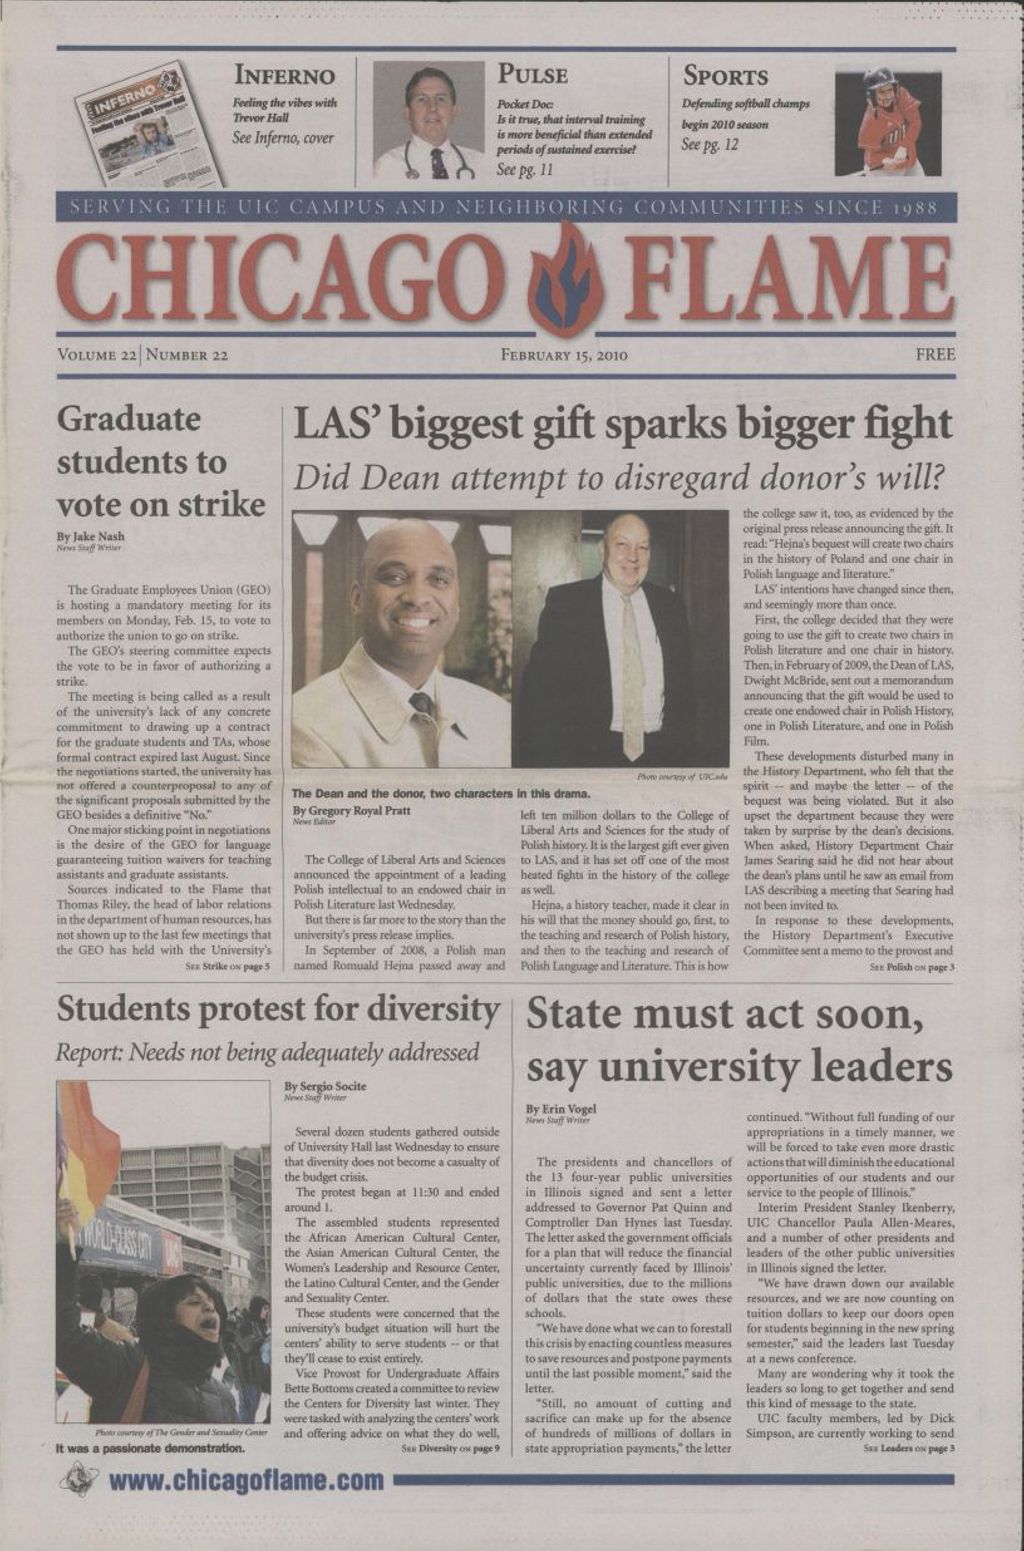 Miniature of Chicago Flame (February 15, 2010)